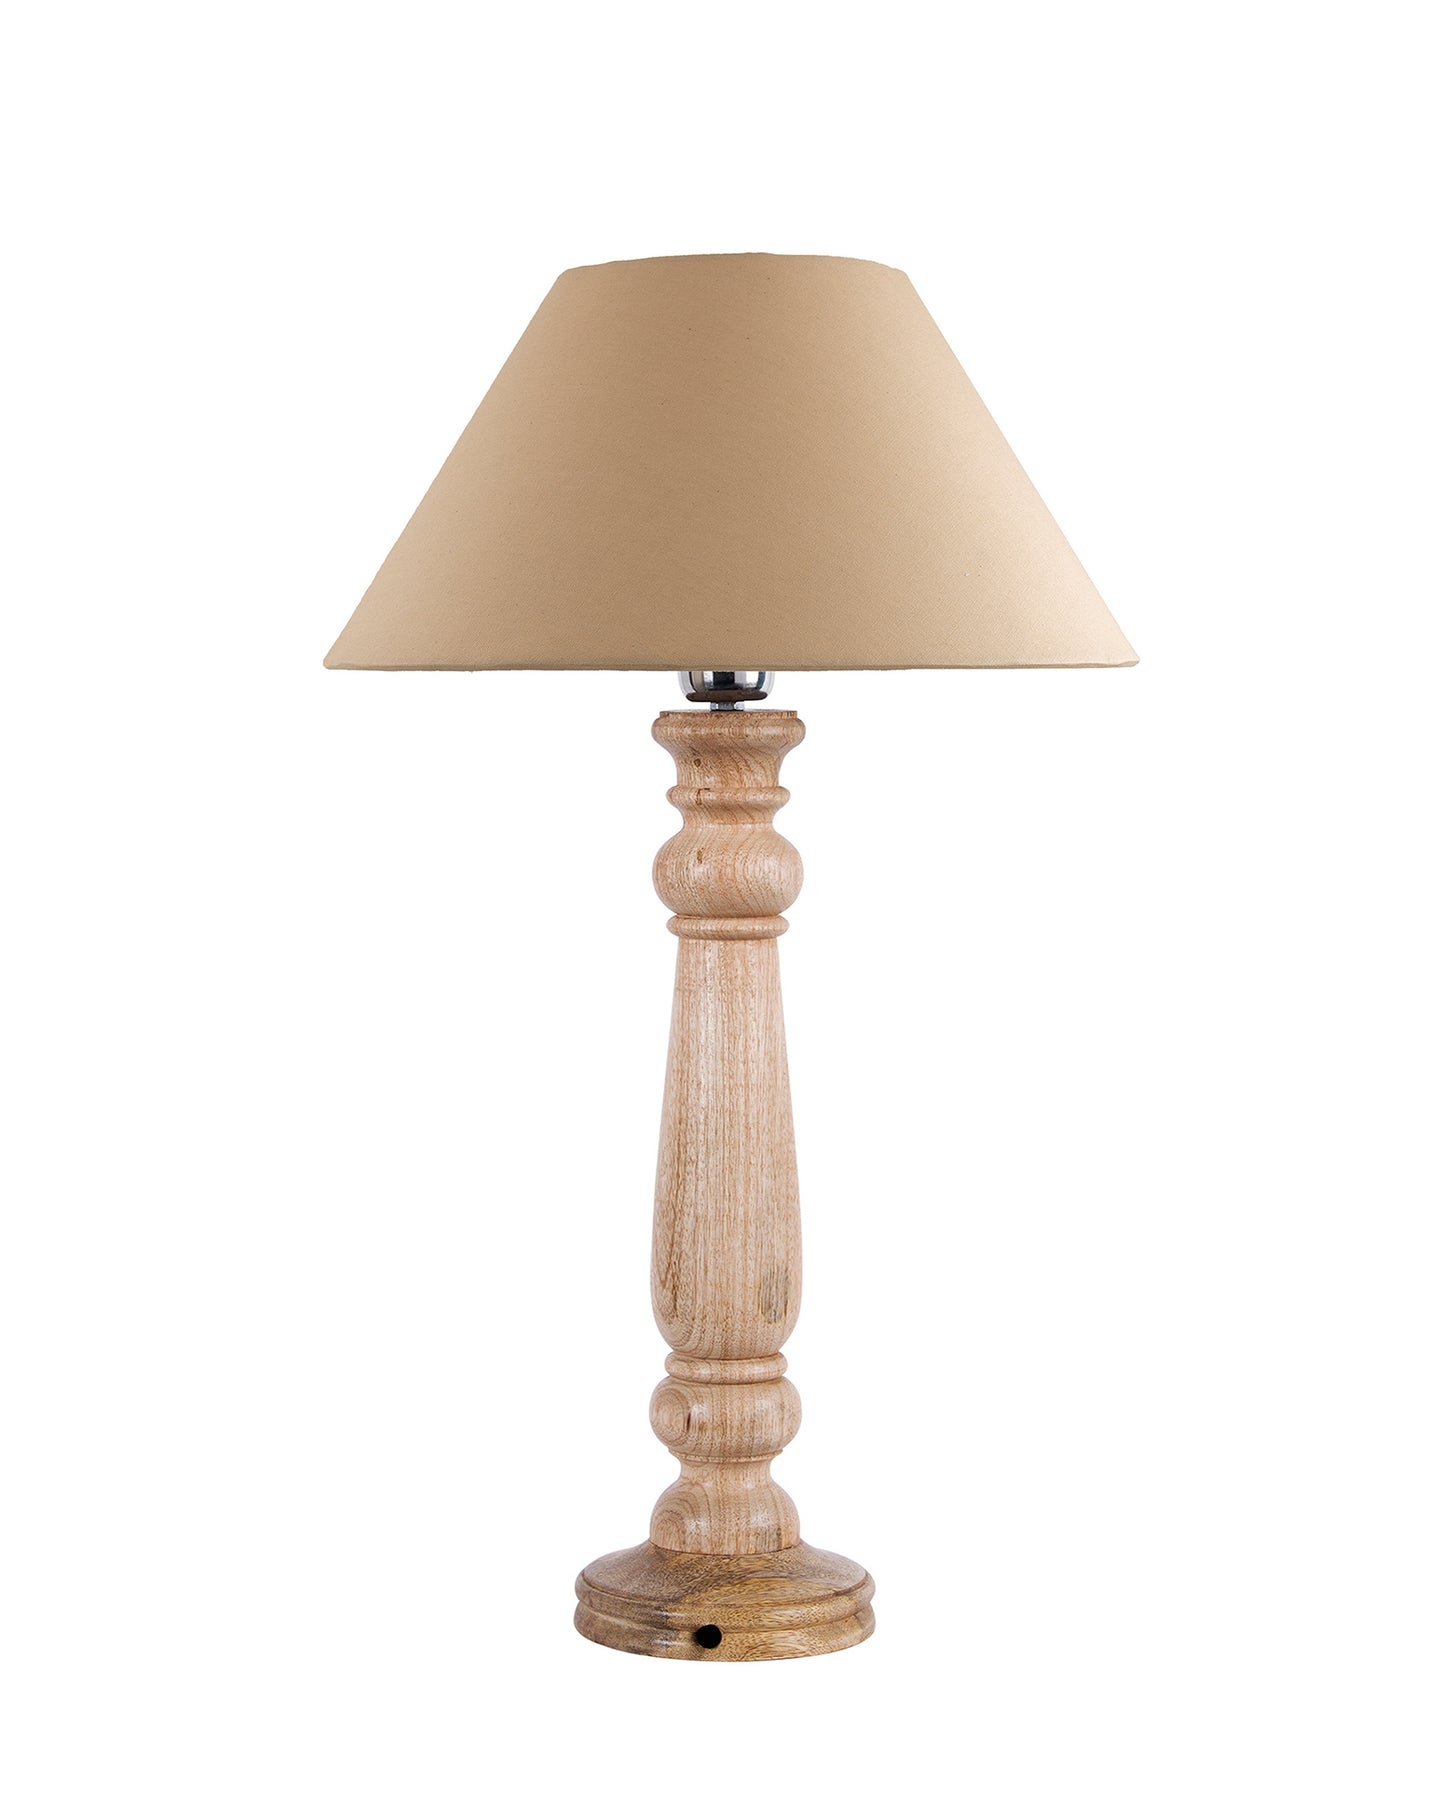 Mabel Rustic Wood Table Lamp with Shade